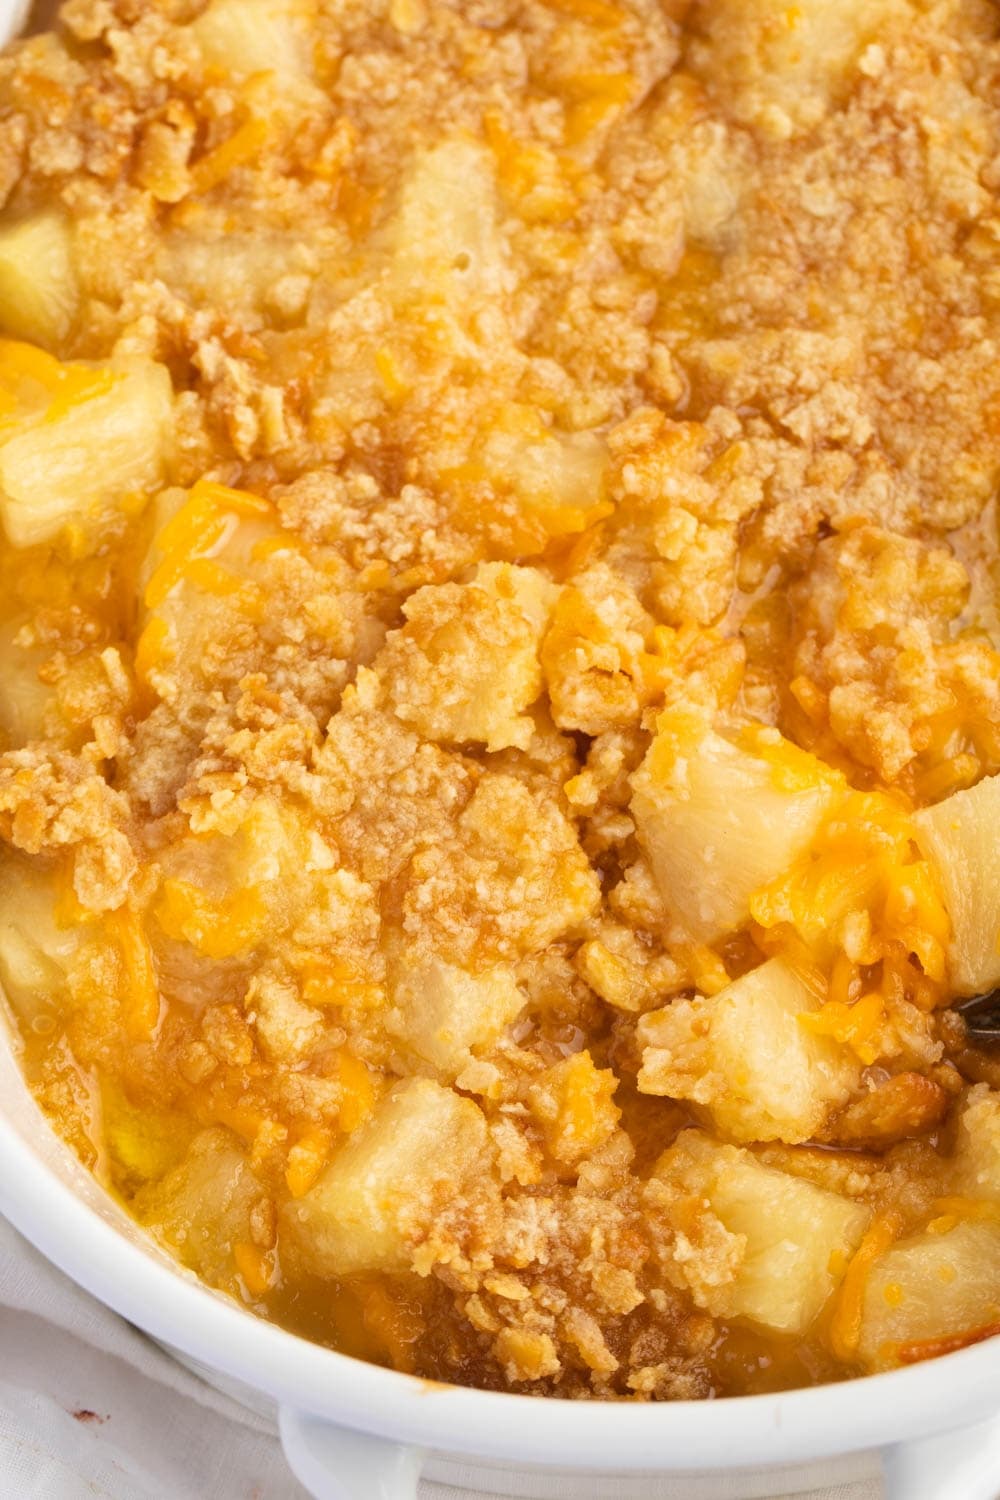 Top View Pineapple Casserole with Melted Cheese on Top